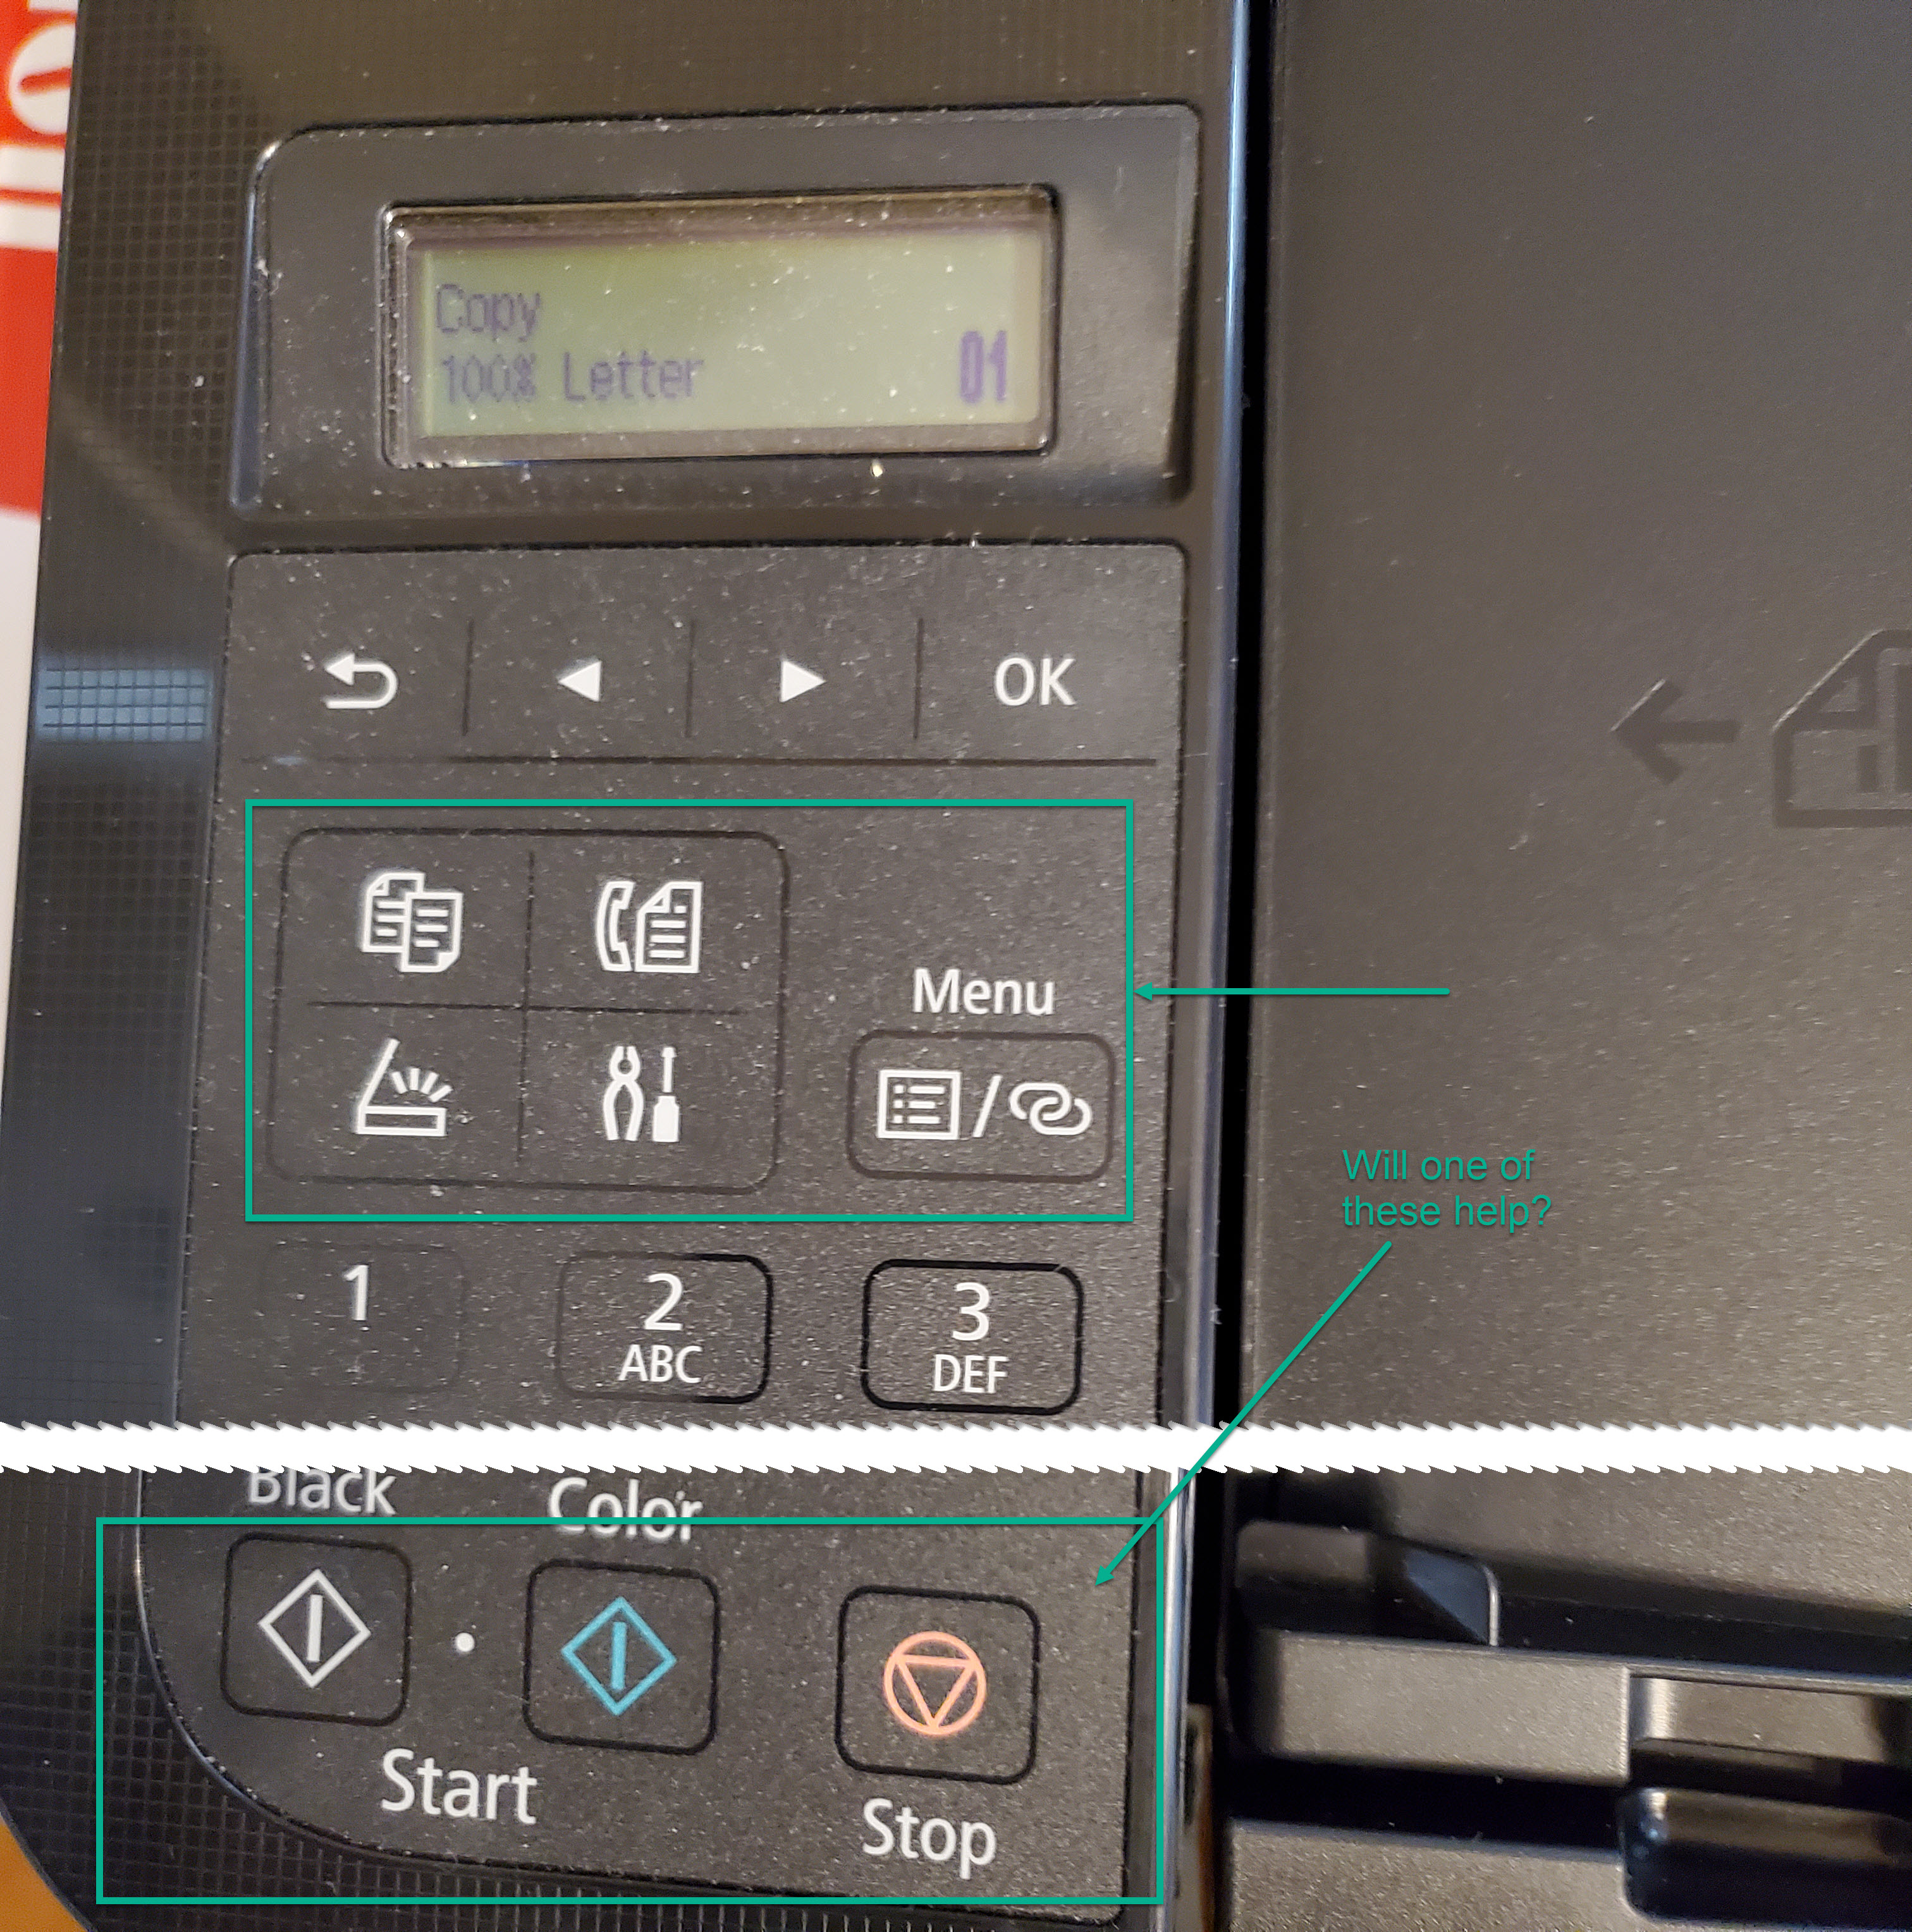 Solved: PIXMA TR4520 Error 2110 "The size/type loaded p... Canon Community